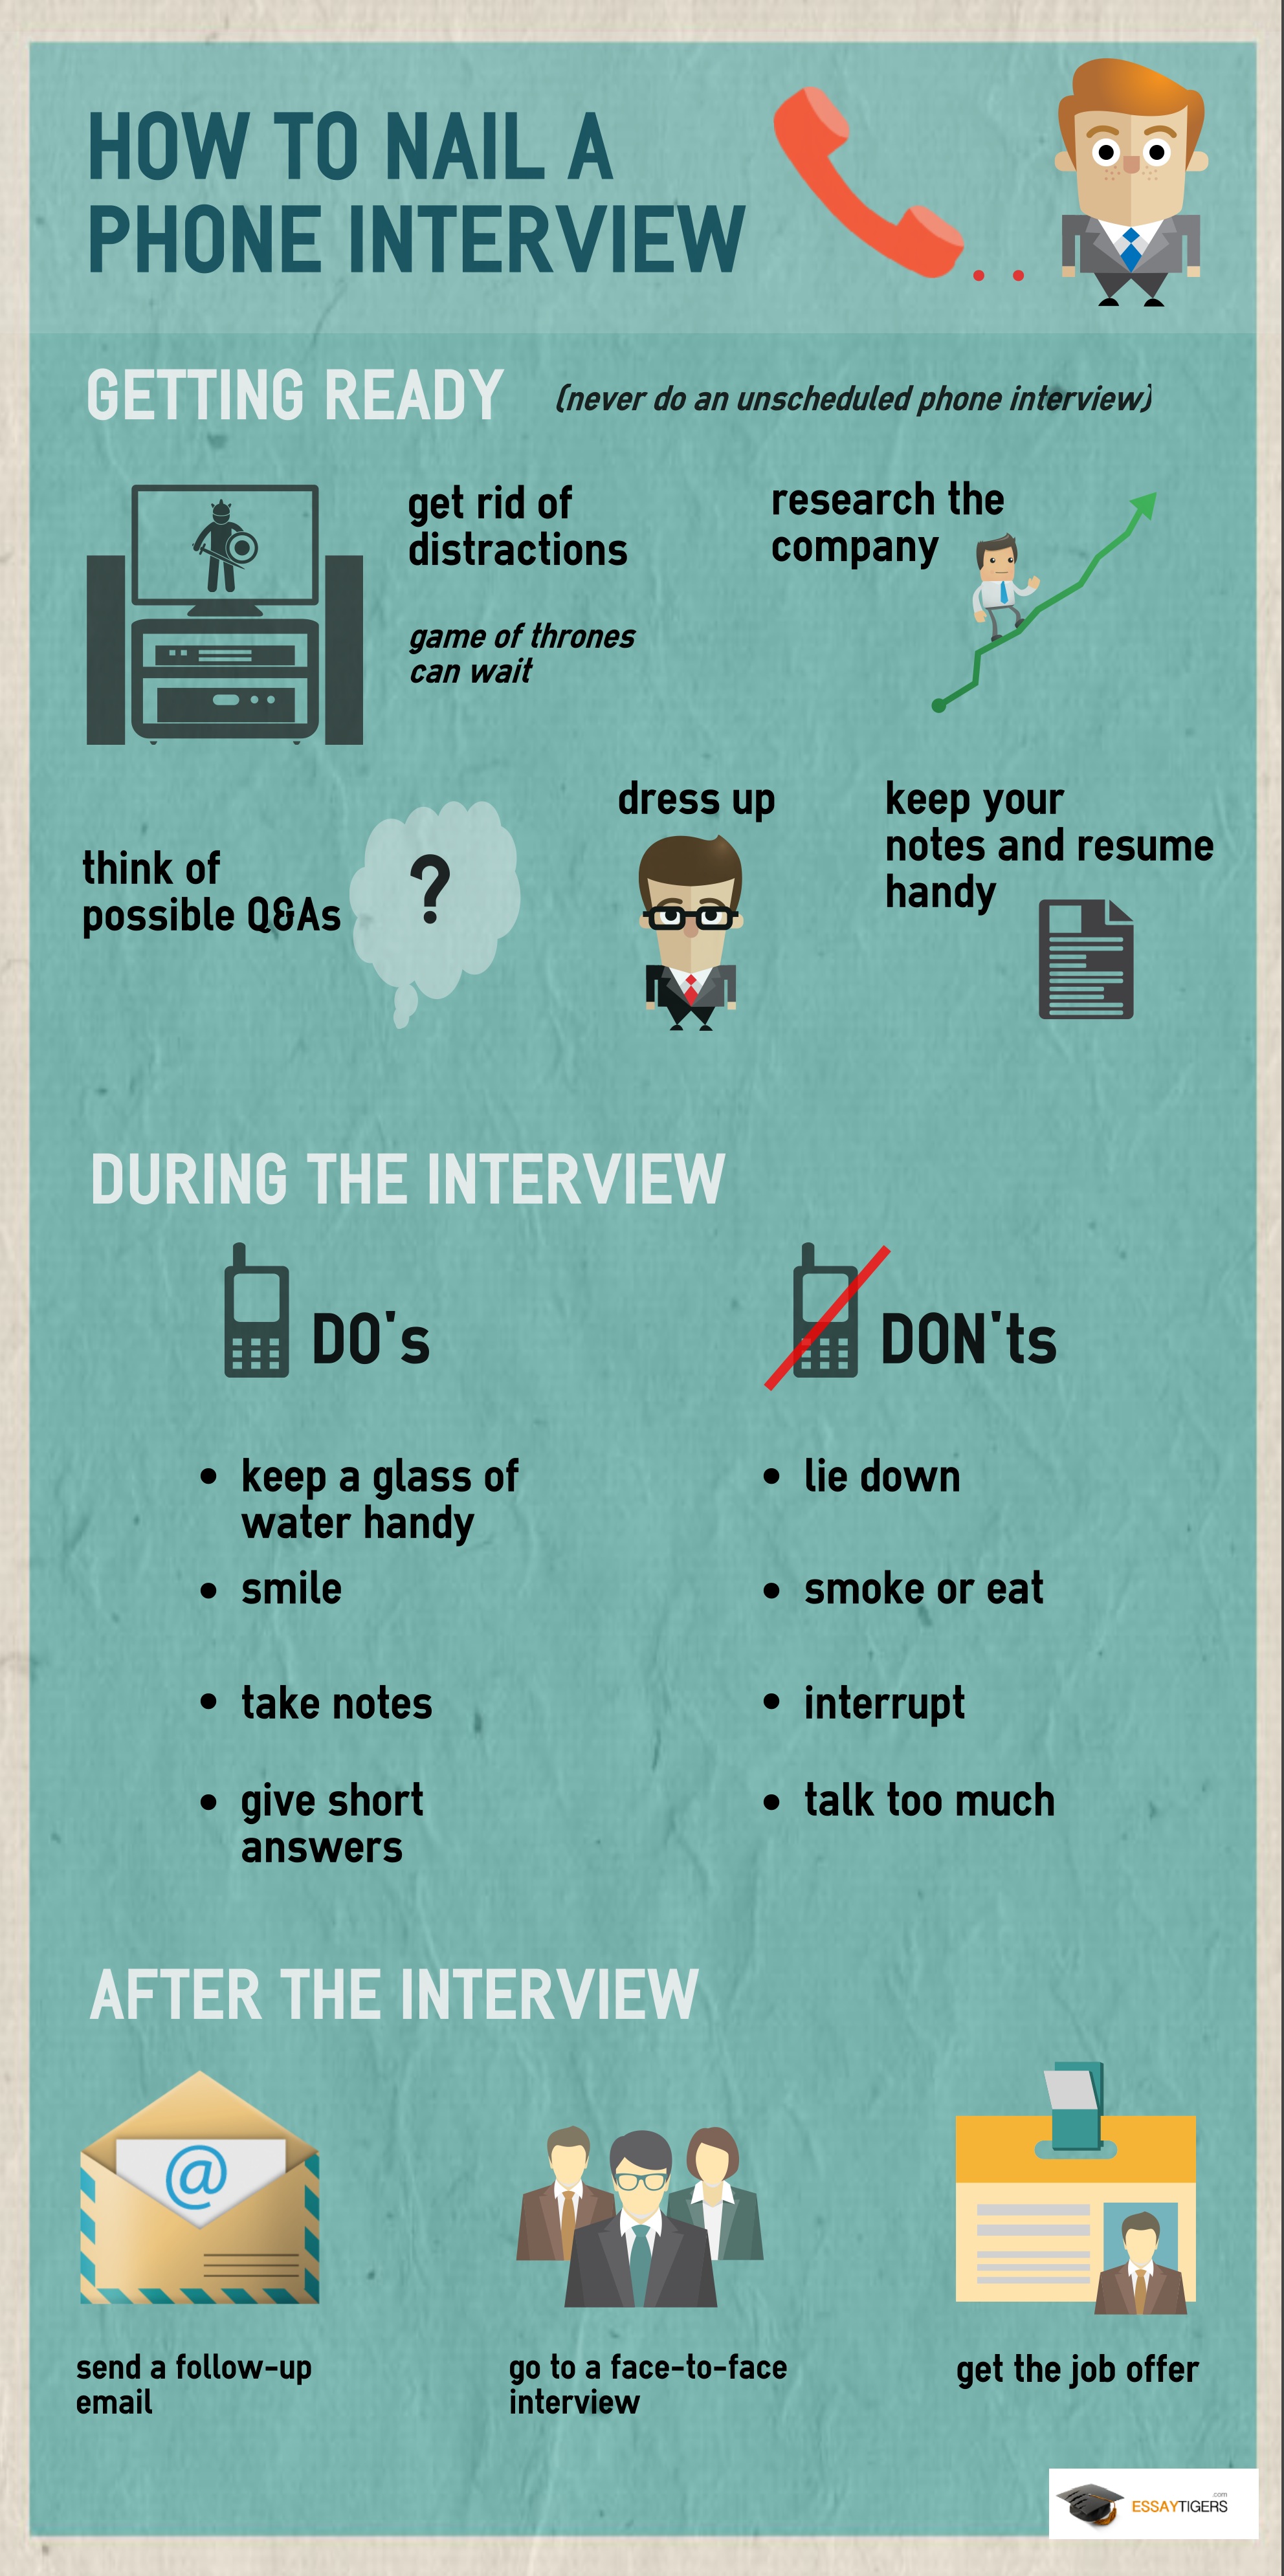 How to Nail a Phone Interview